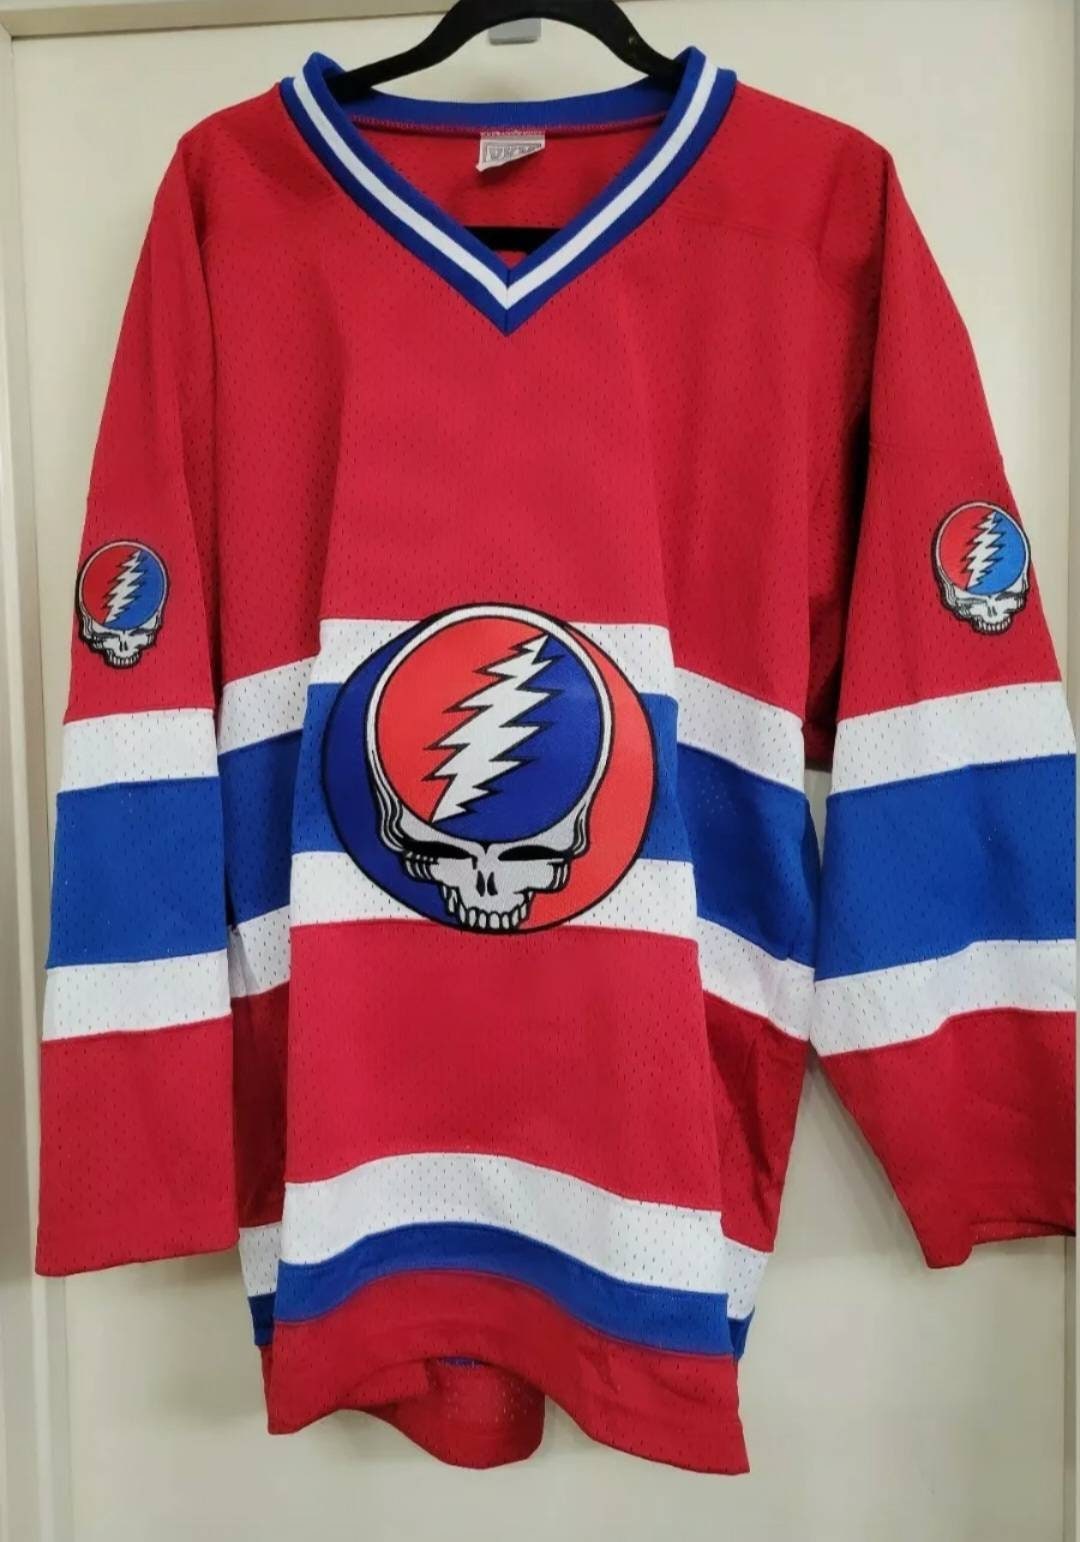 Grateful Dead New Jersey Devils 3D Hockey Jersey Personalized Name Number